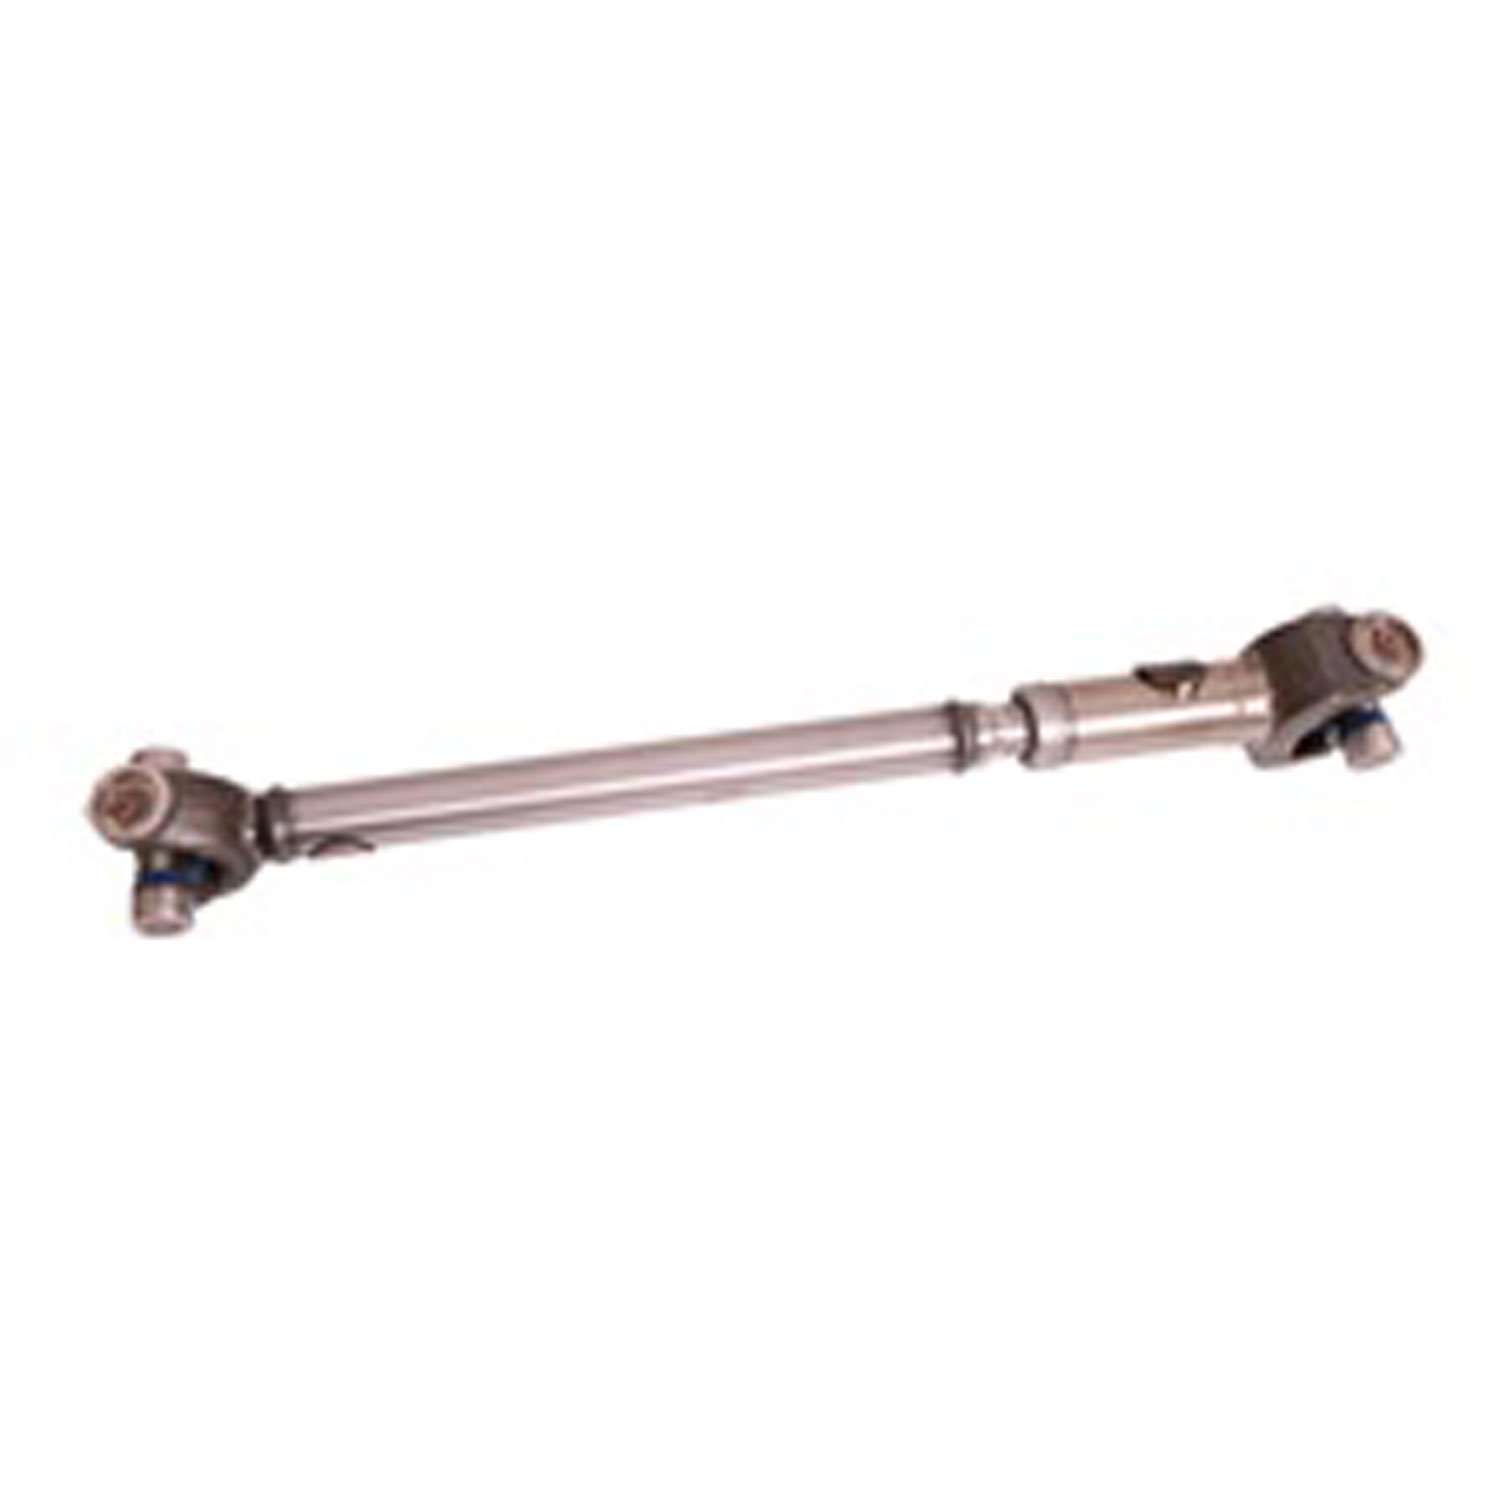 Stock replacement front driveshaft from Omix-ADA, Fits 46-49 Willys CJ2A 49-53 CJ3A 53-68 CJ3B and 55-71 Jeep CJ5.